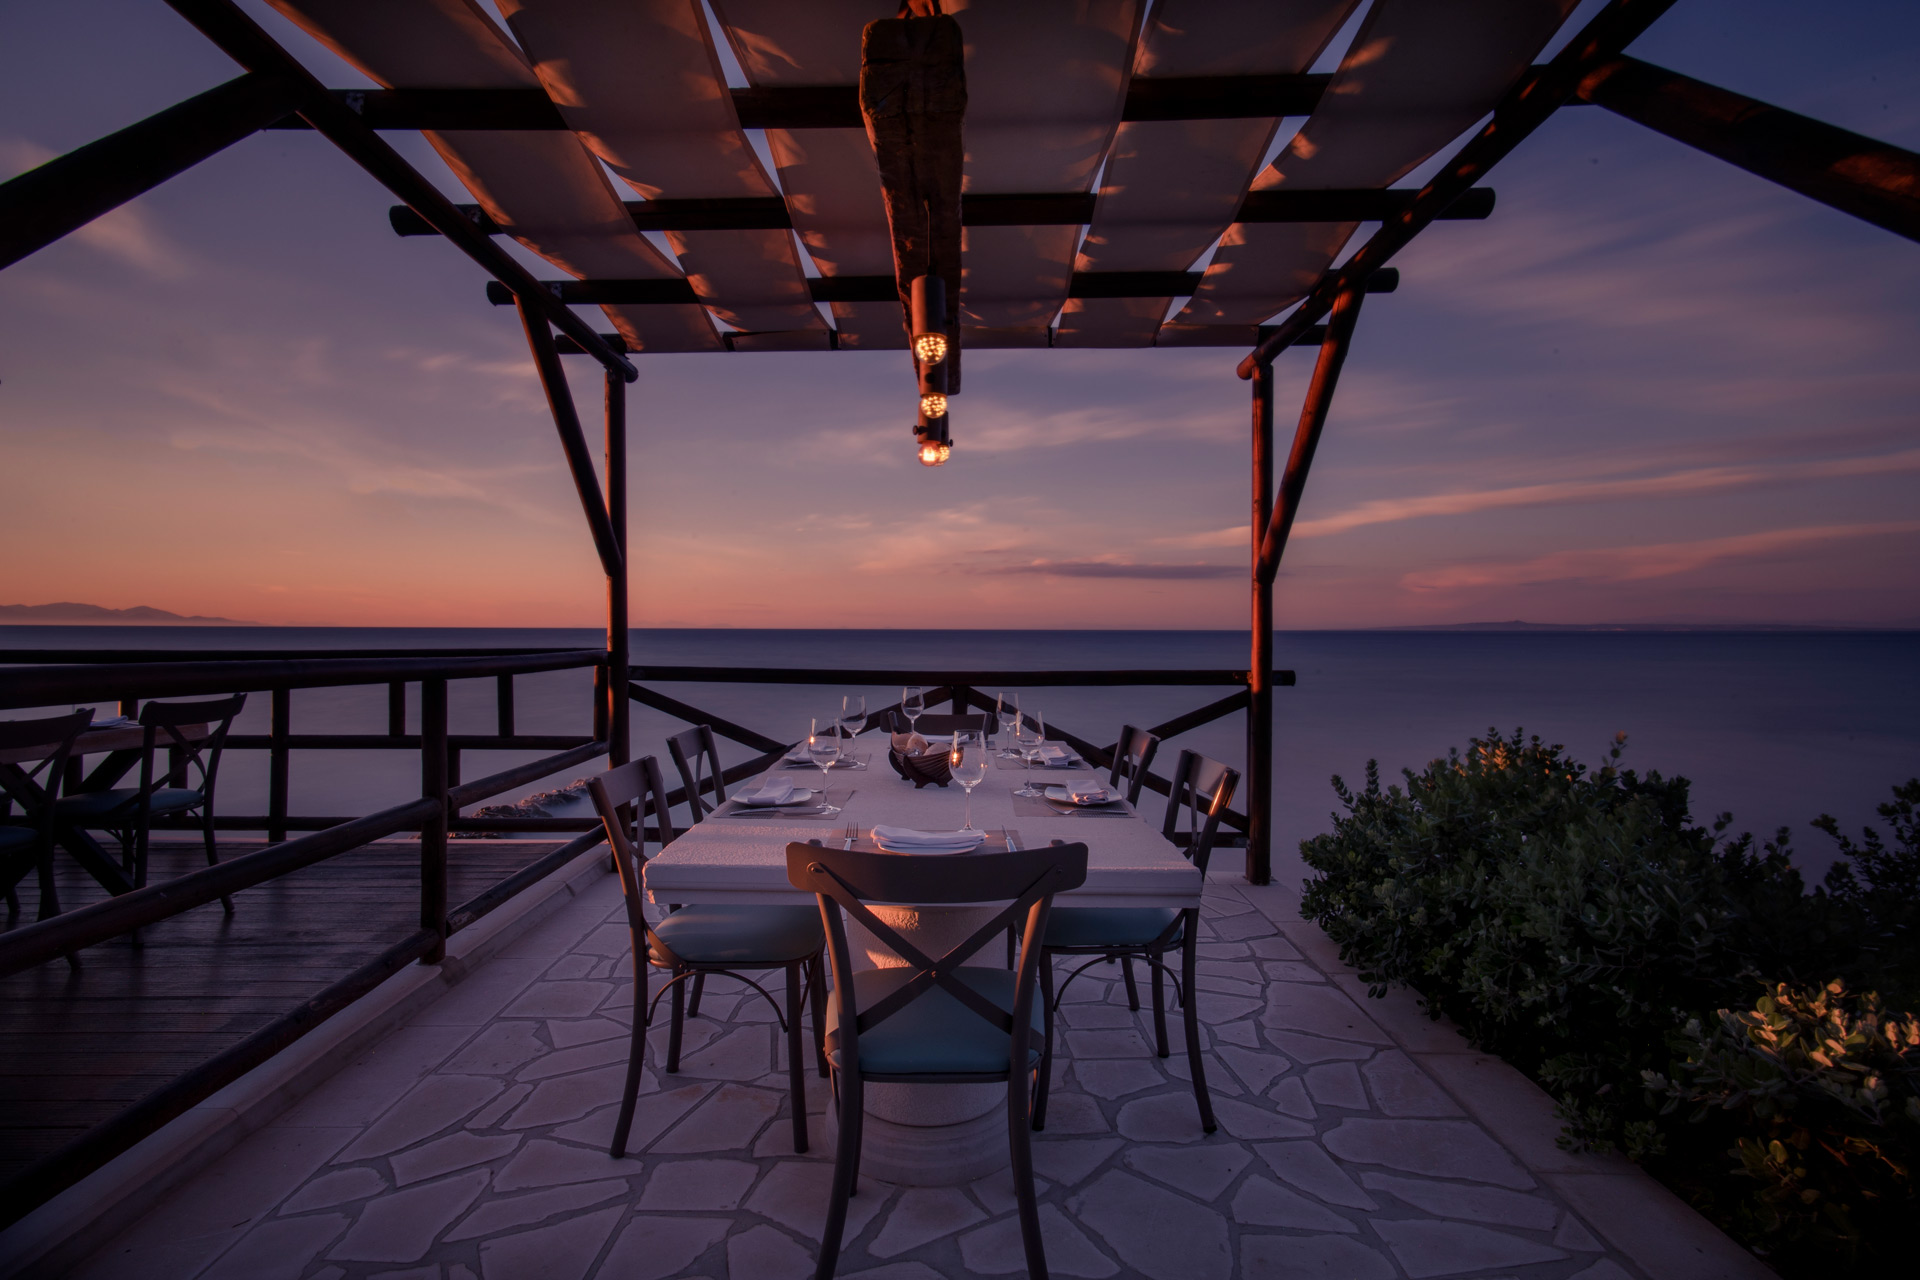 Outdoor dining at sunset at Windmill Bay Hotel